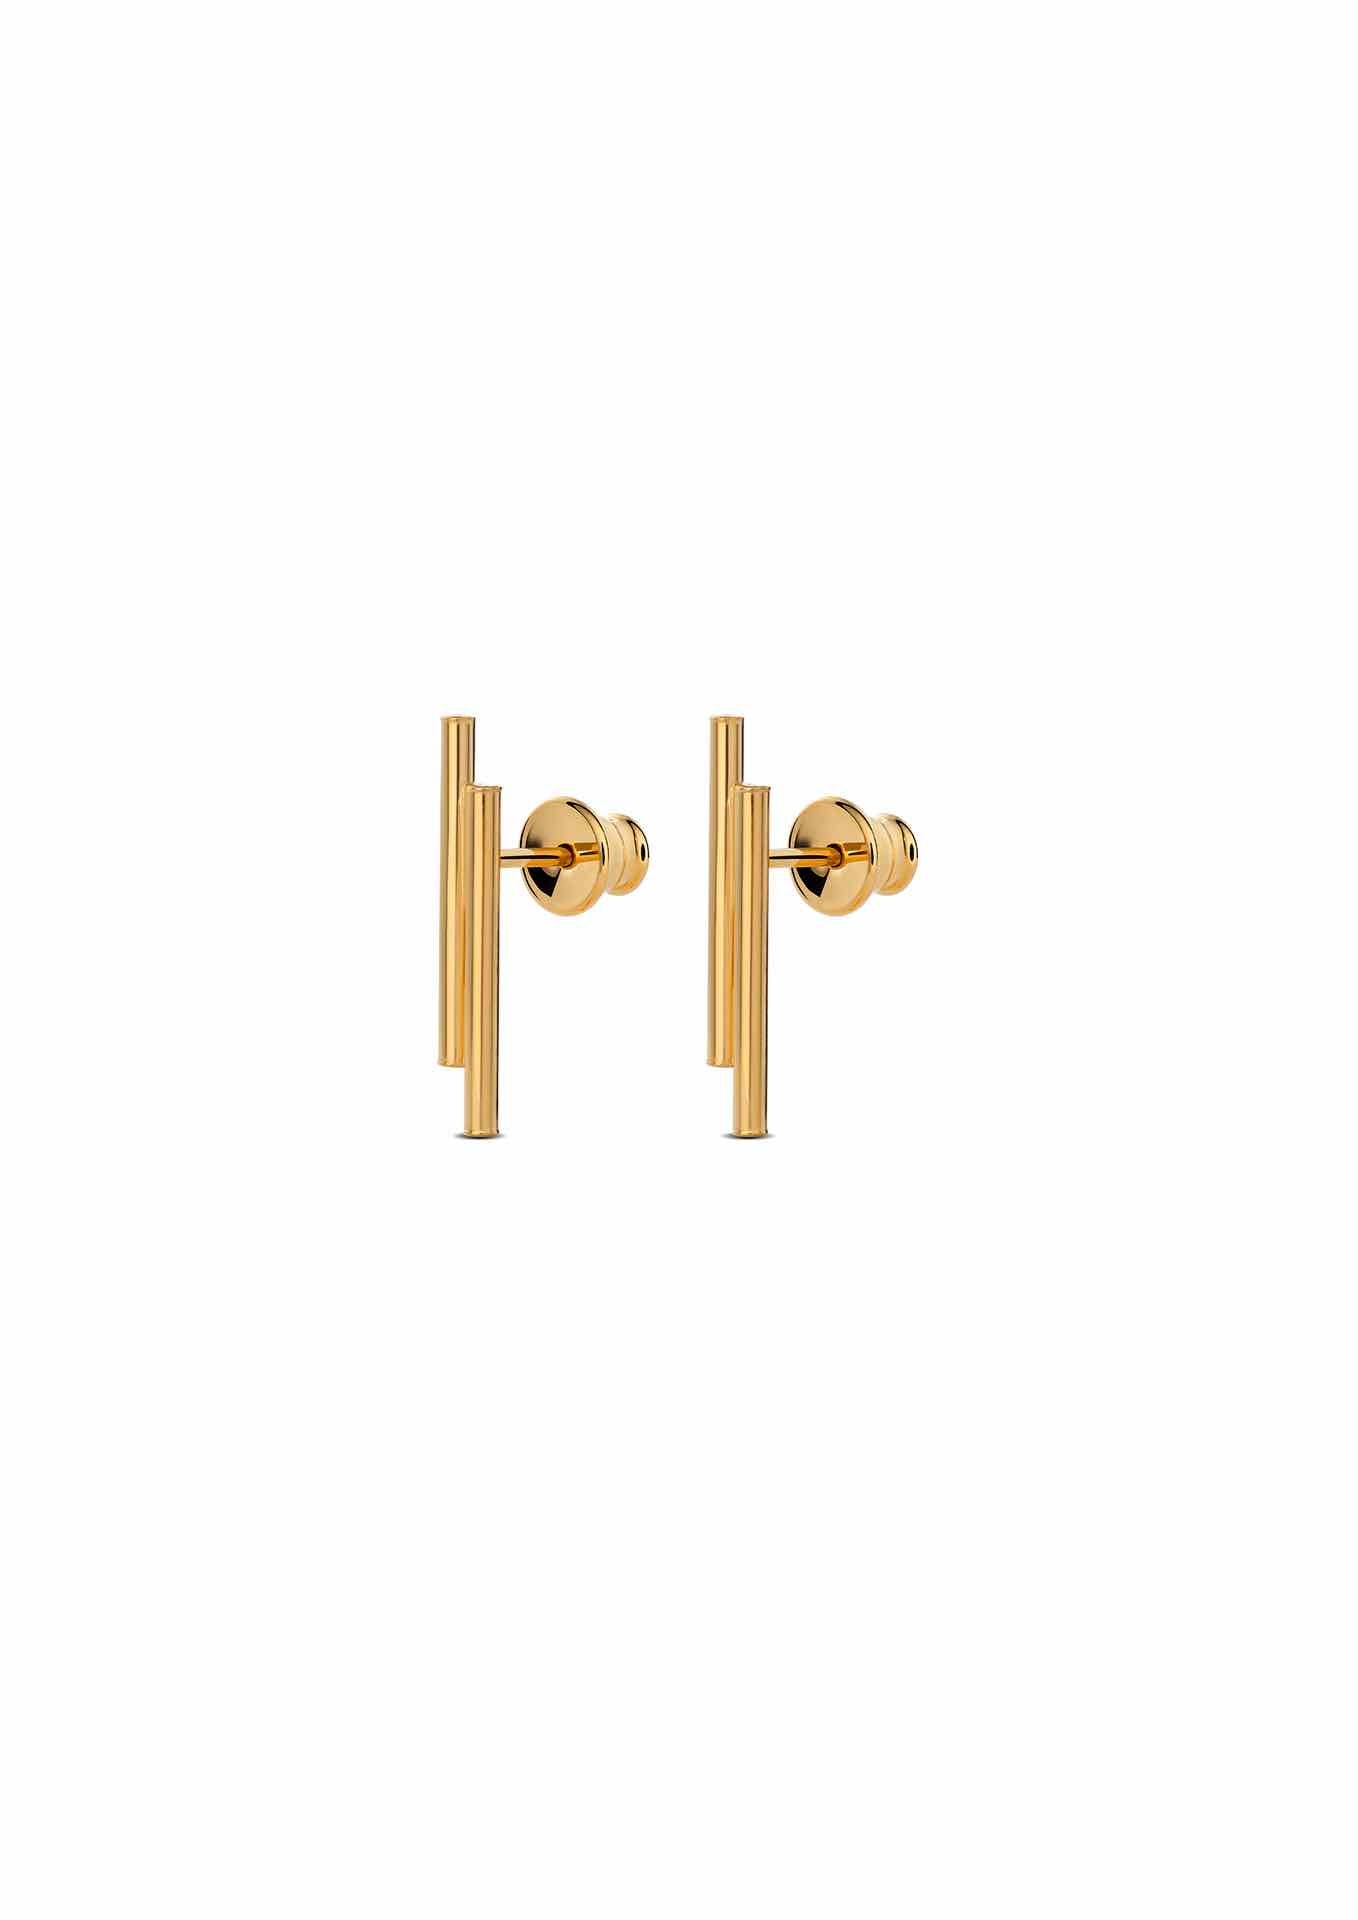 NO MORE accessories Double Pipe Earrings in gold plated sterling silver